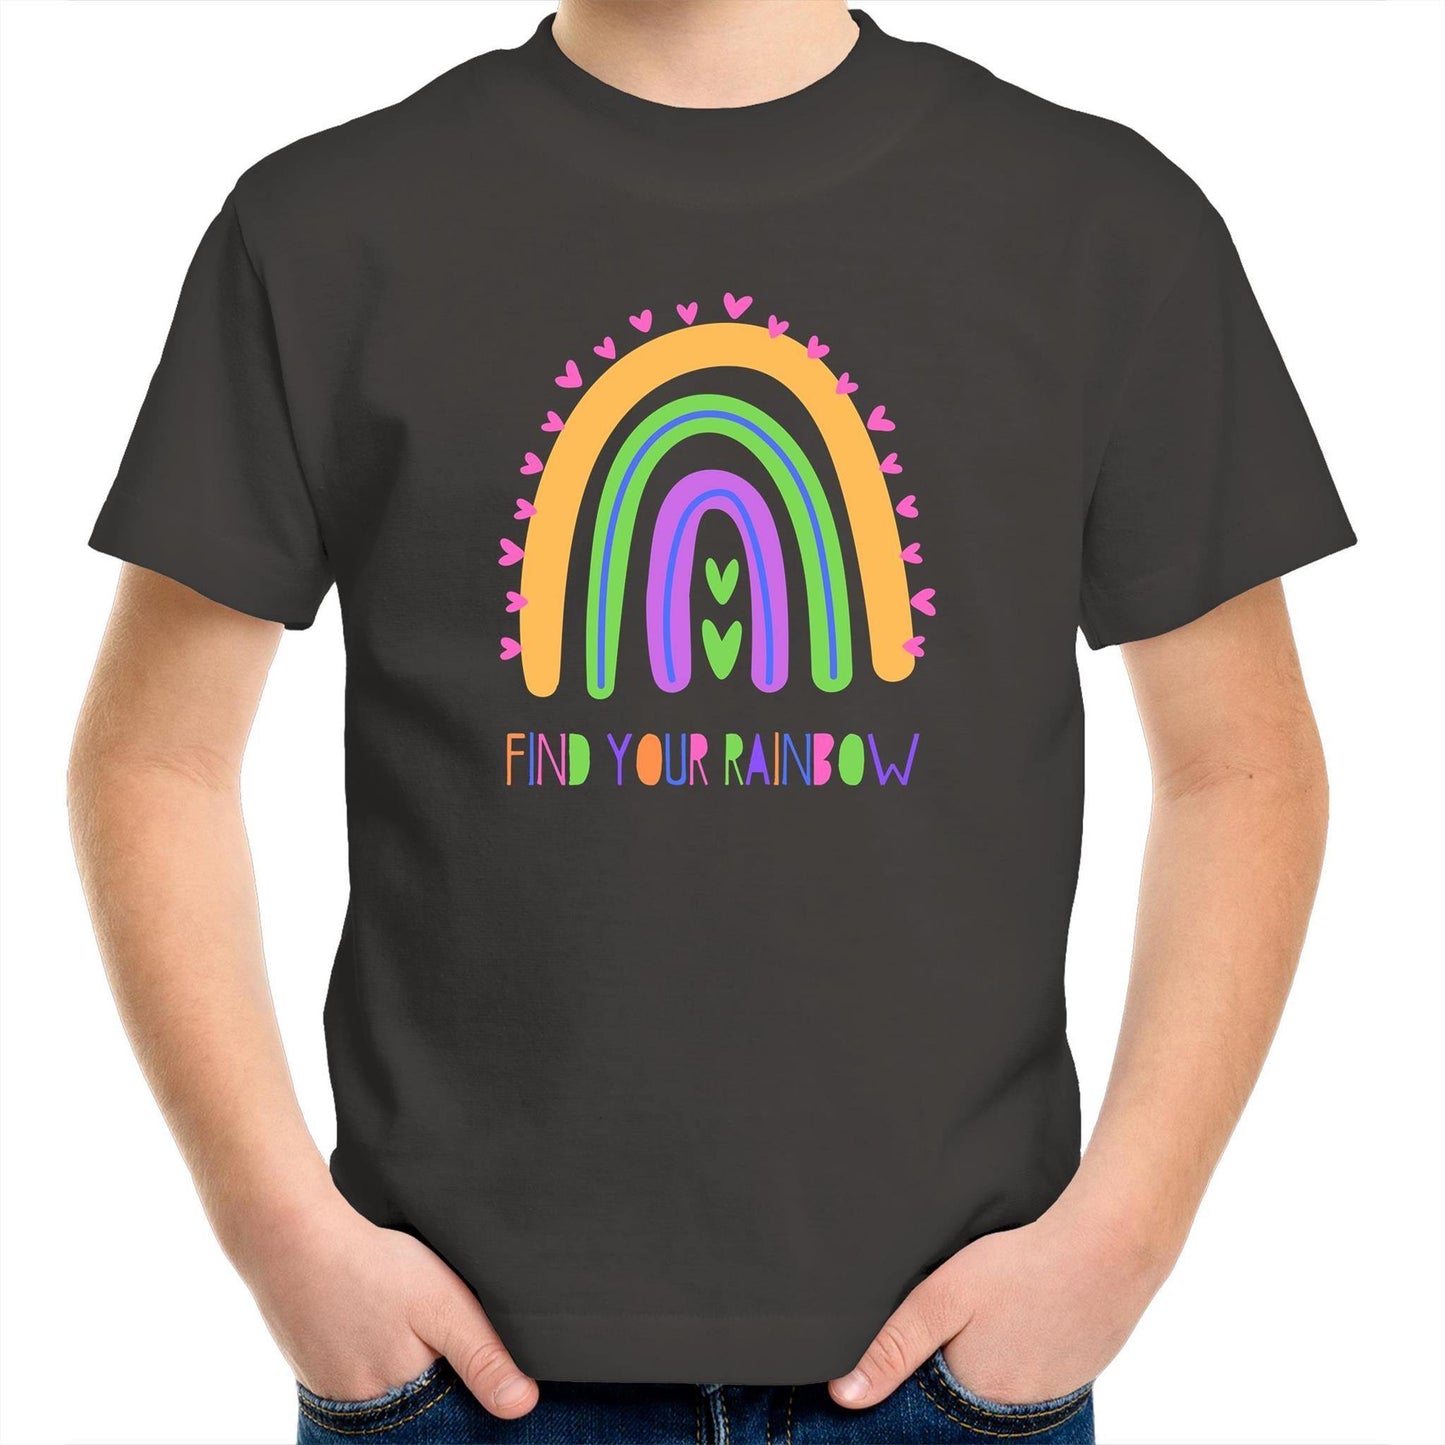 Find Your Rainbow - Kids Youth Crew T-Shirt Charcoal Kids Youth T-shirt